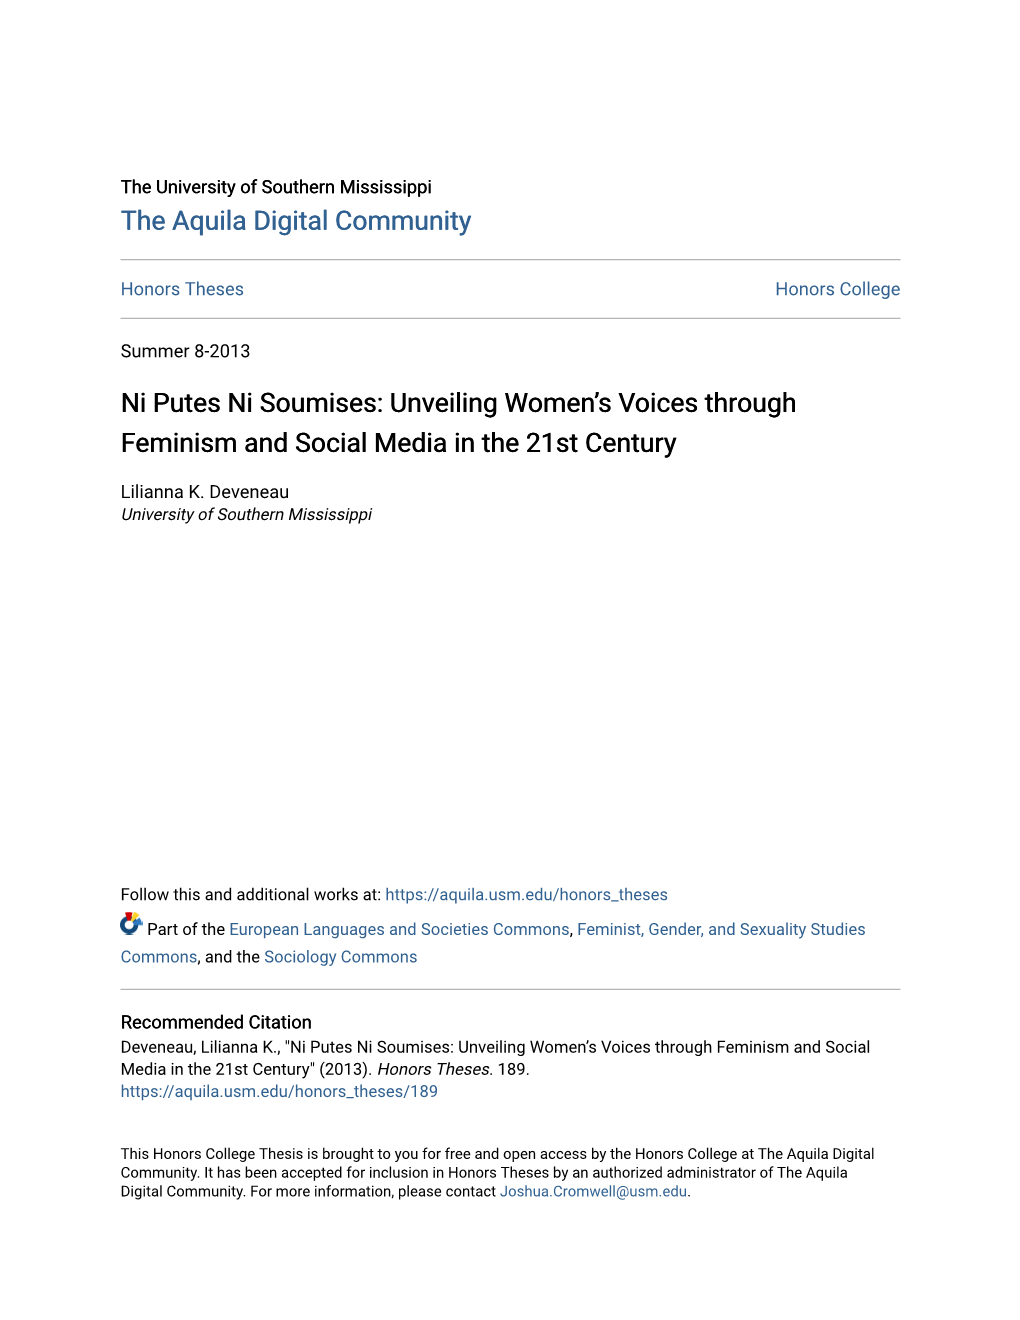 Ni Putes Ni Soumises: Unveiling Women’S Voices Through Feminism and Social Media in the 21St Century